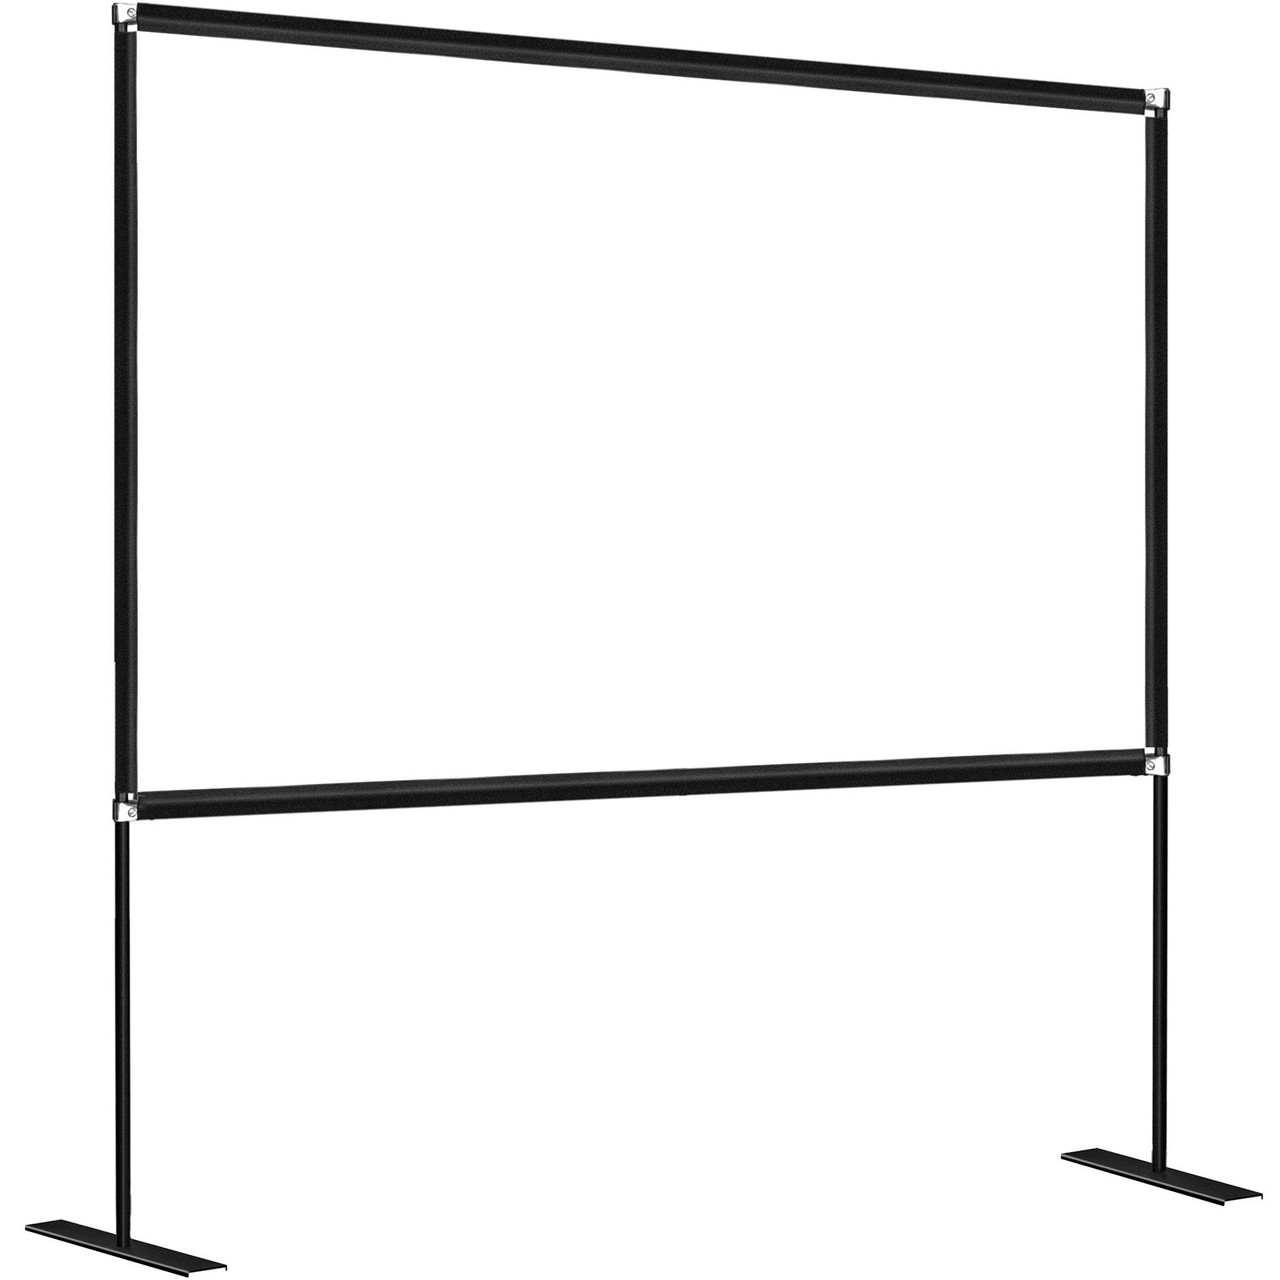 VEVOR Projector Screen with Stand 100inch Portable Movie Screen 16:9 4K HD Wide Angle Projector Screen Stand Easy Assembly with Storage Bag for Home Theater Office Outdoor Use